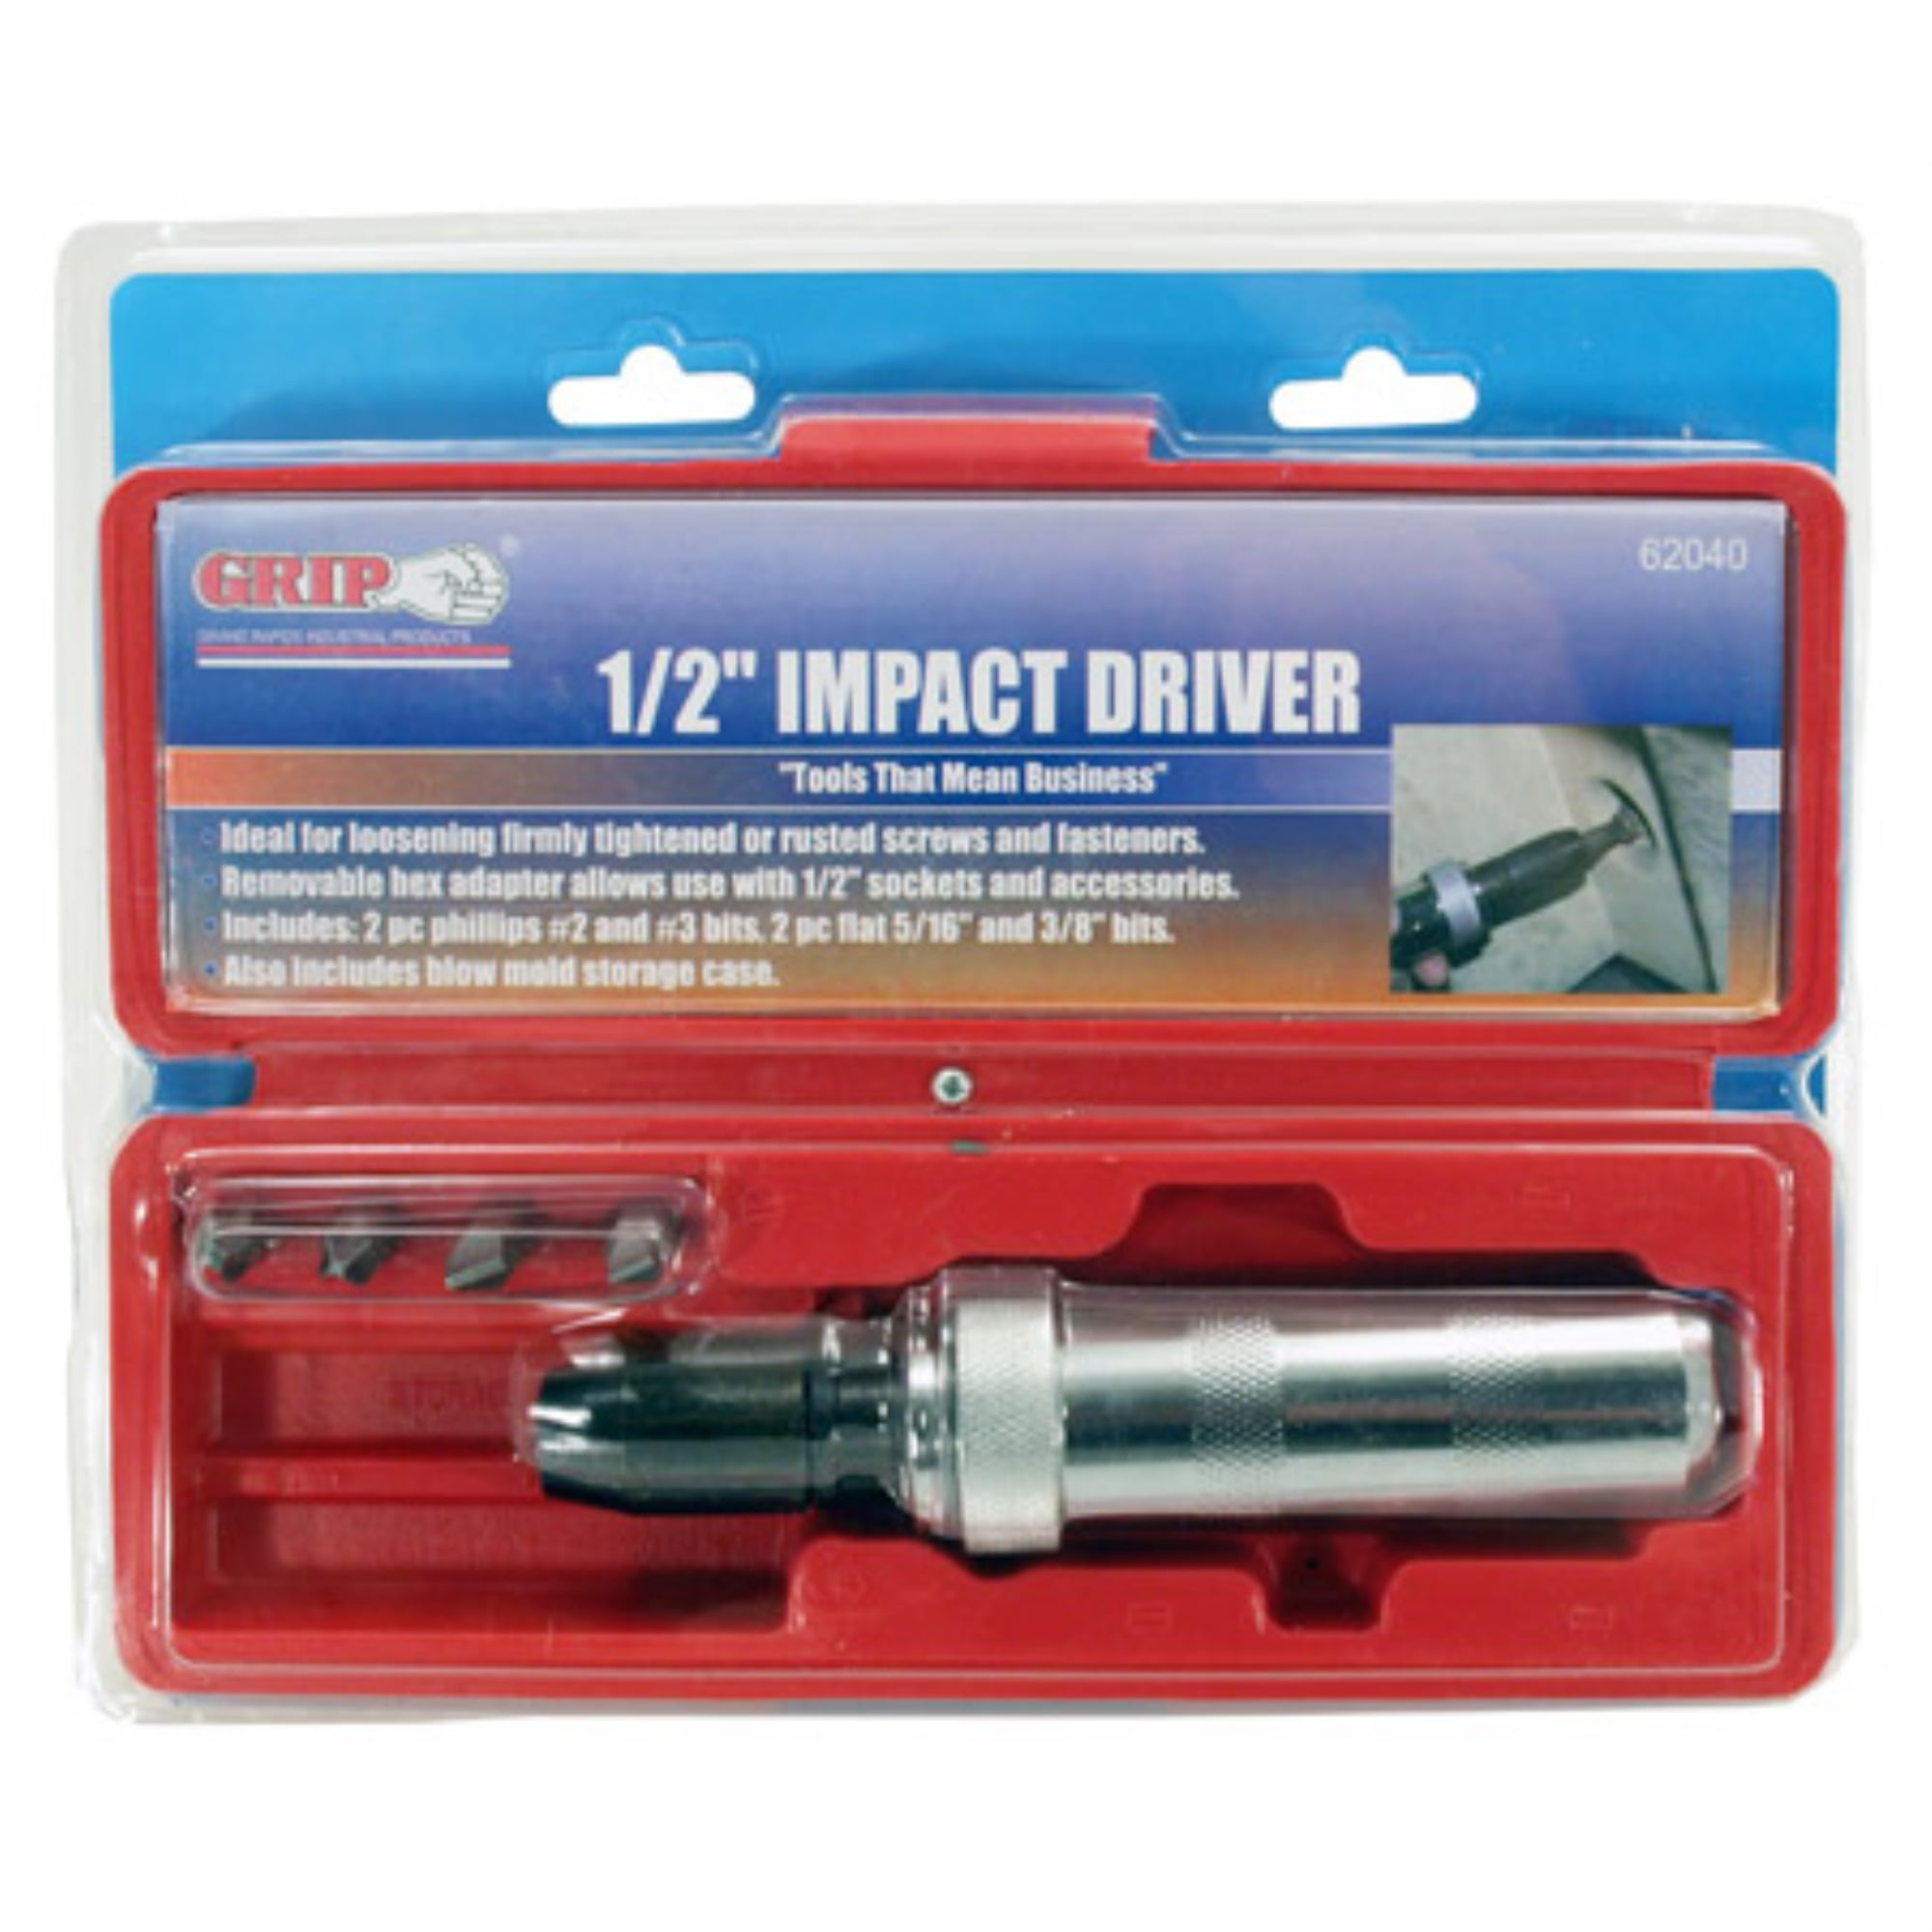 Disengage Brake Caliper Screws or Frozen Bolts Comes with 12 Bits Cover Most Common Applications Penck 5/16 Drive Manual Reversible Impact Screwdriver Set Rusted Fasteners